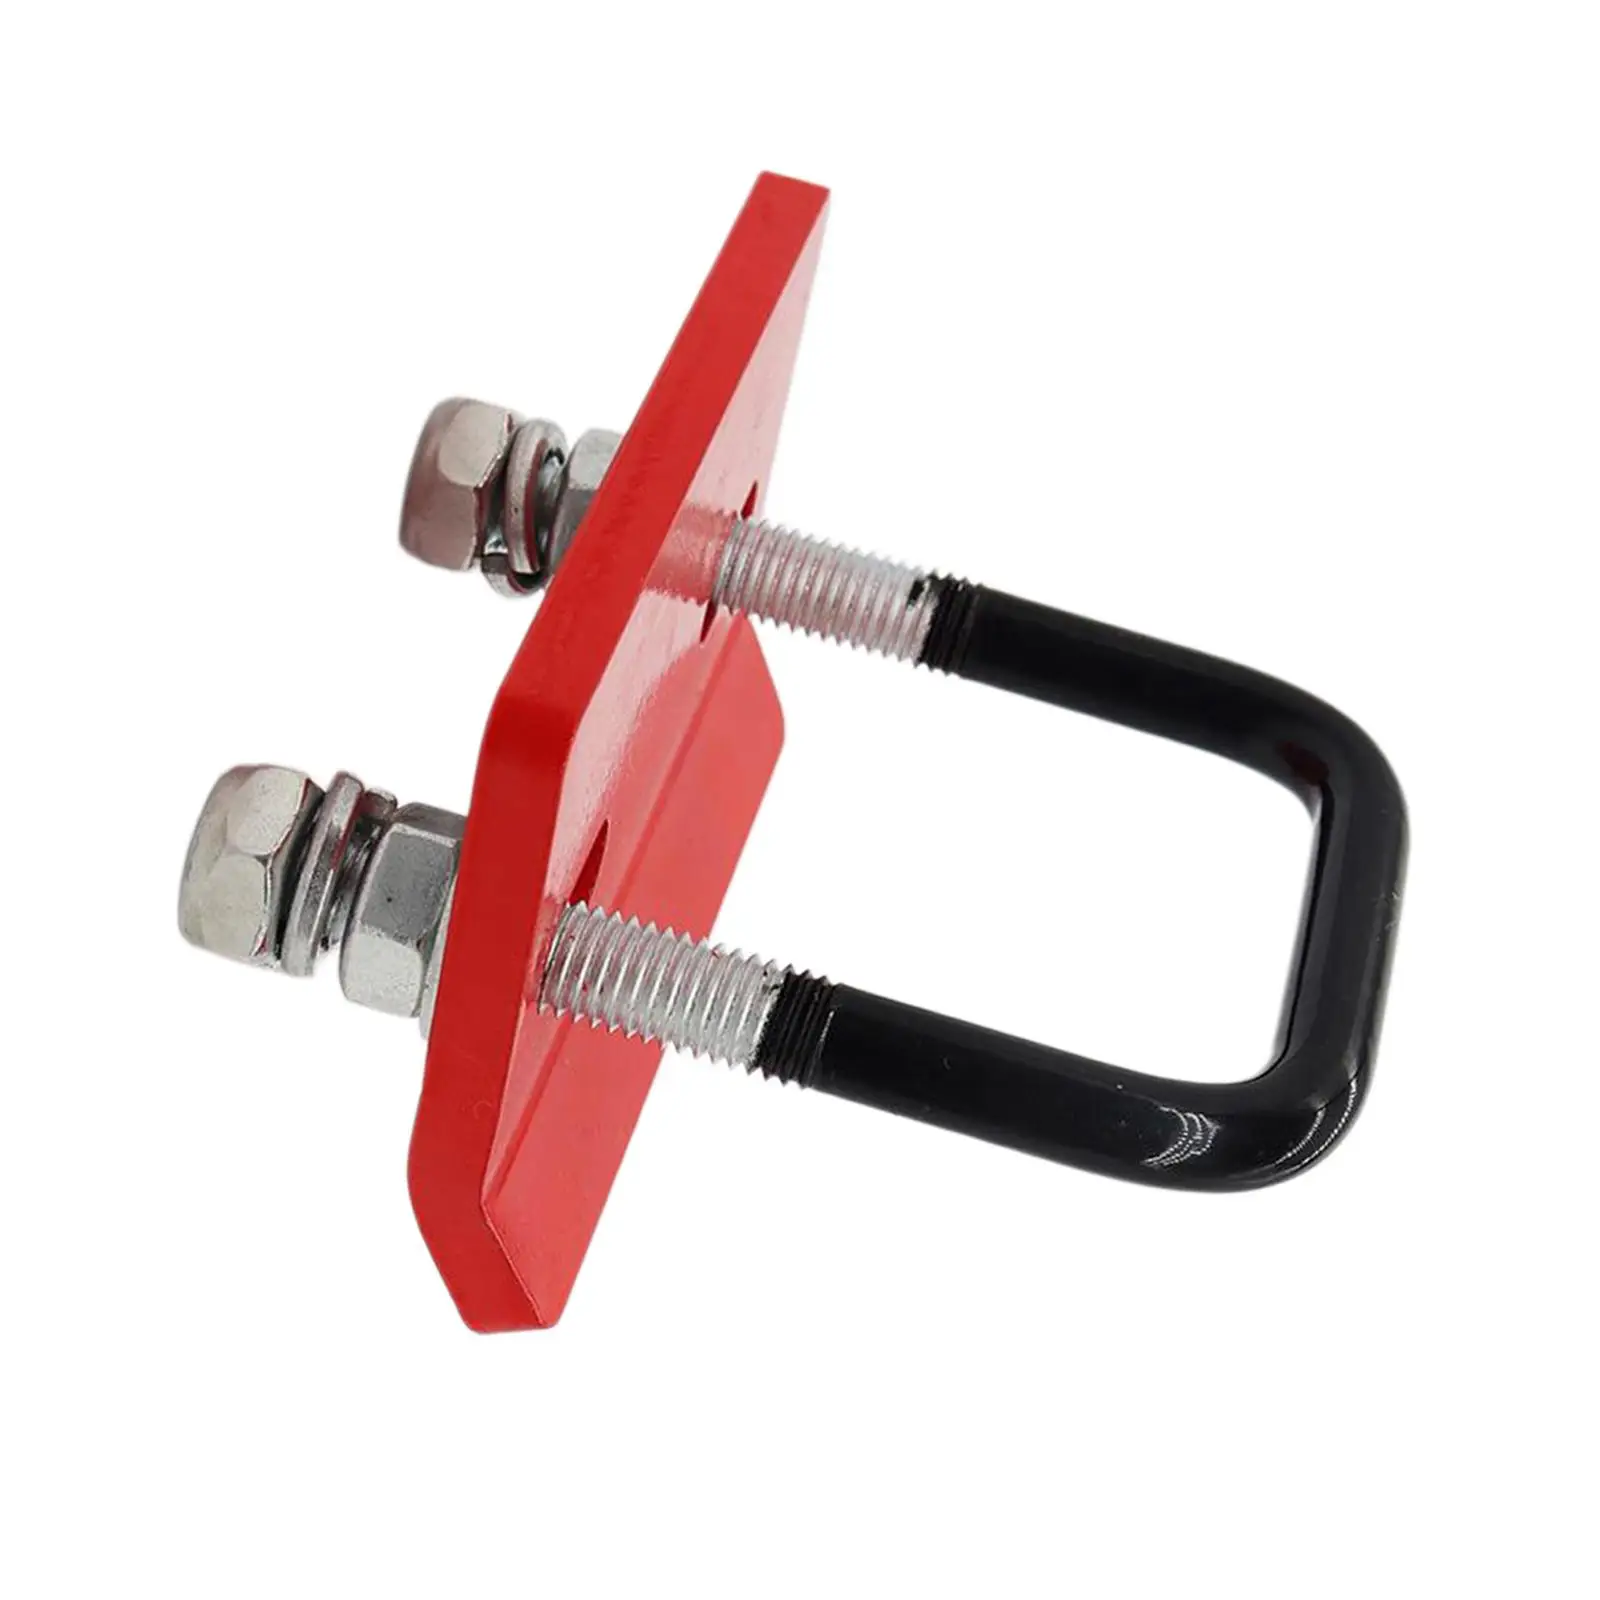 Alloy Steel Hitch Tightener Anti Rattle Stabilizer for Hitch Tray Bike Rack